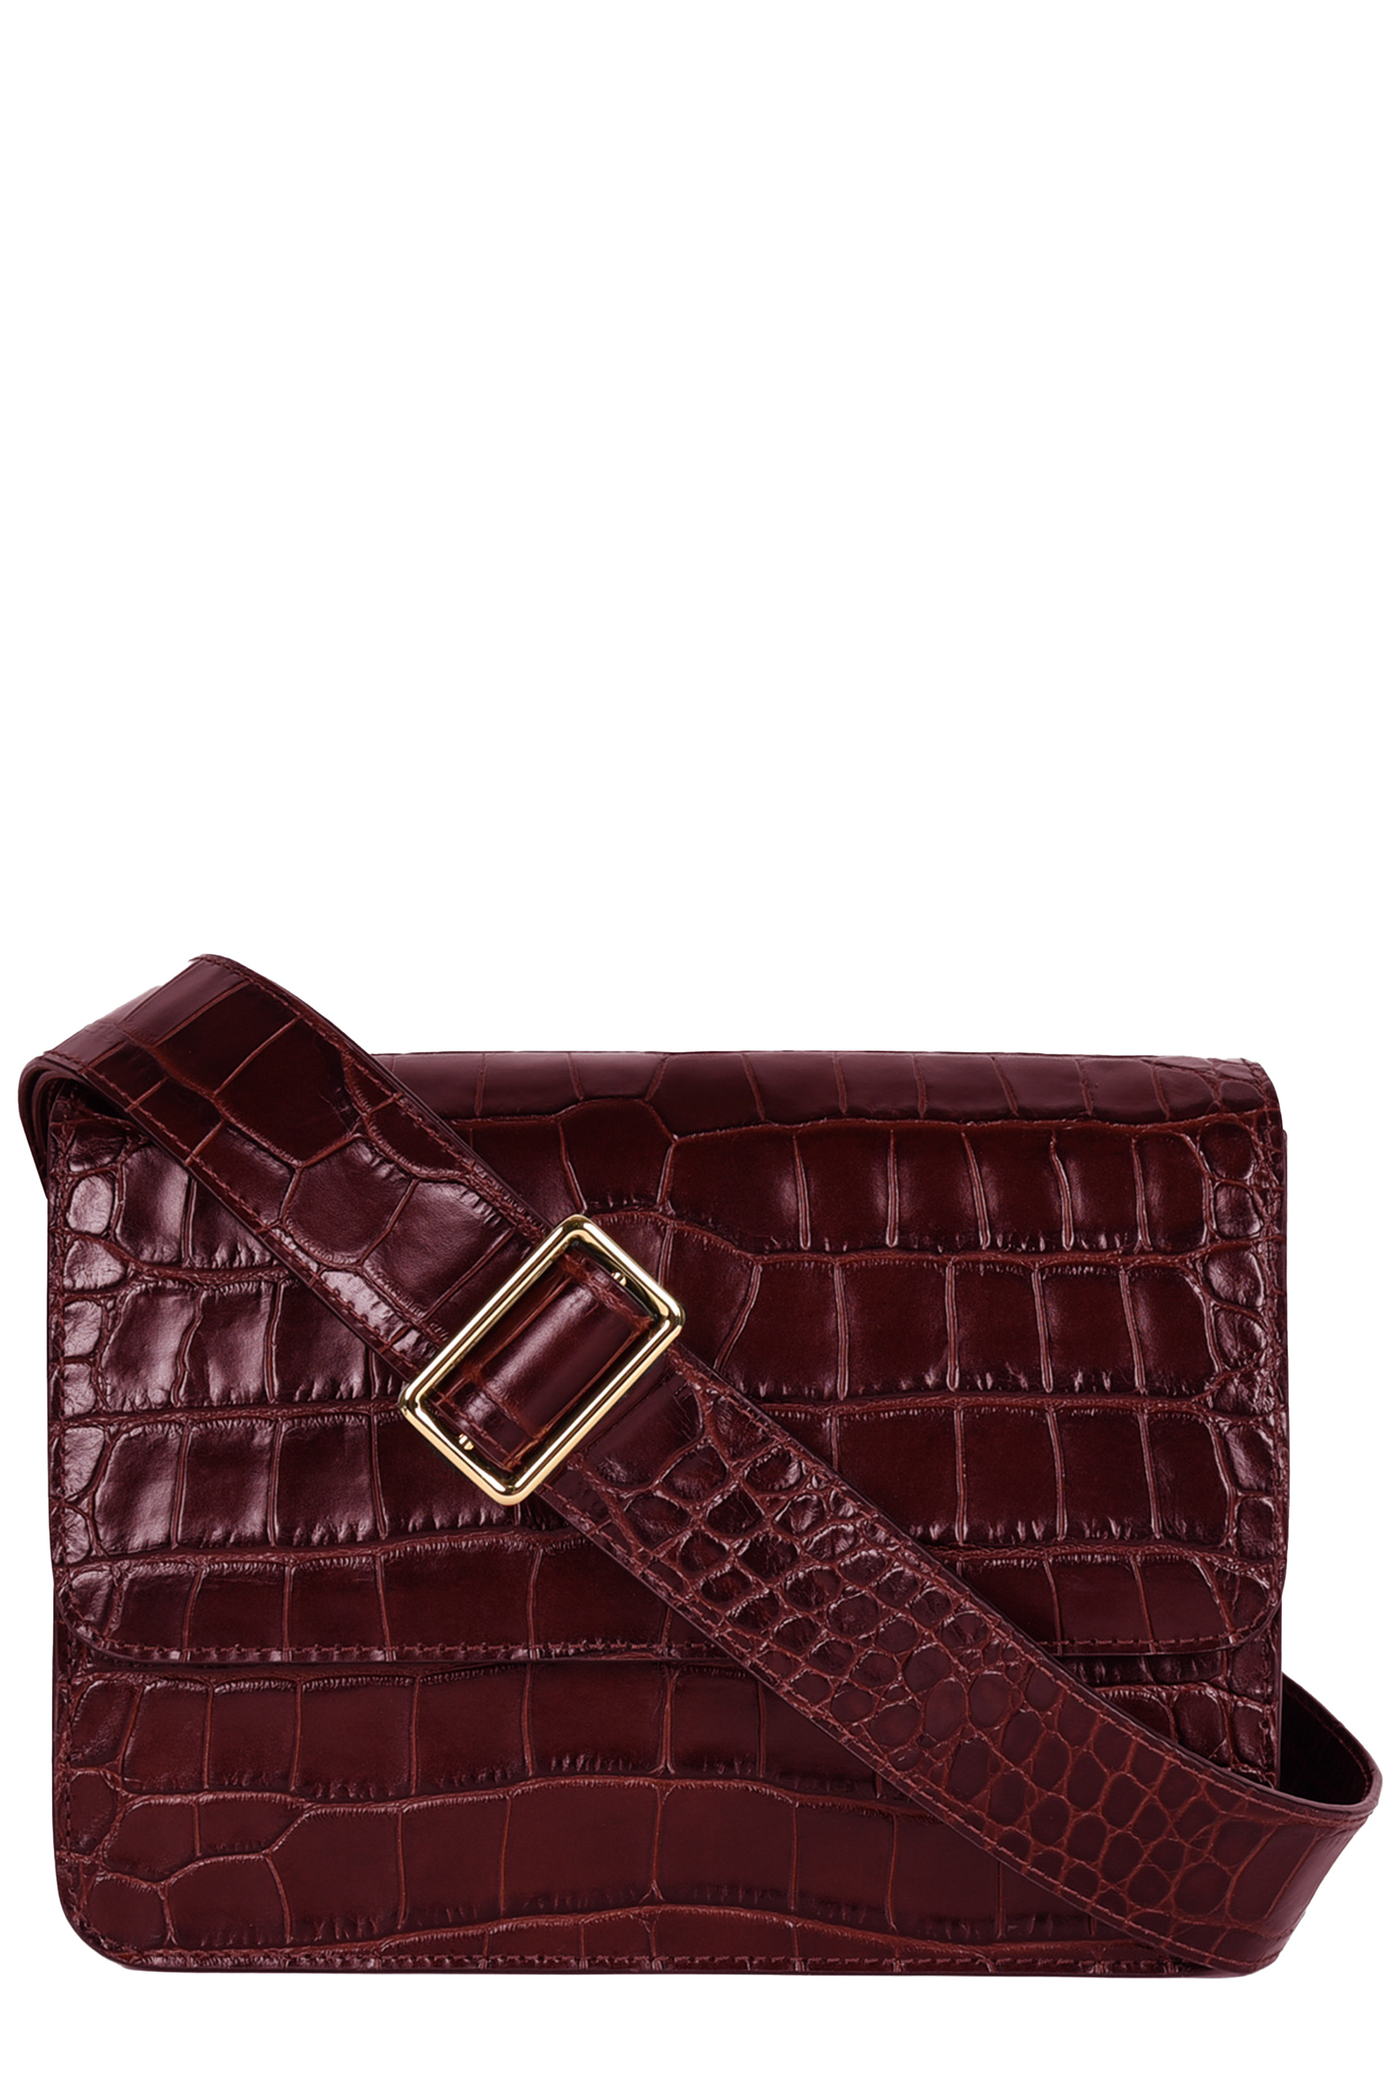 HYER GOODS: LUXE CUBE BAG WITH REMOVABLE SHOULDER STRAP IN BURGUNDY